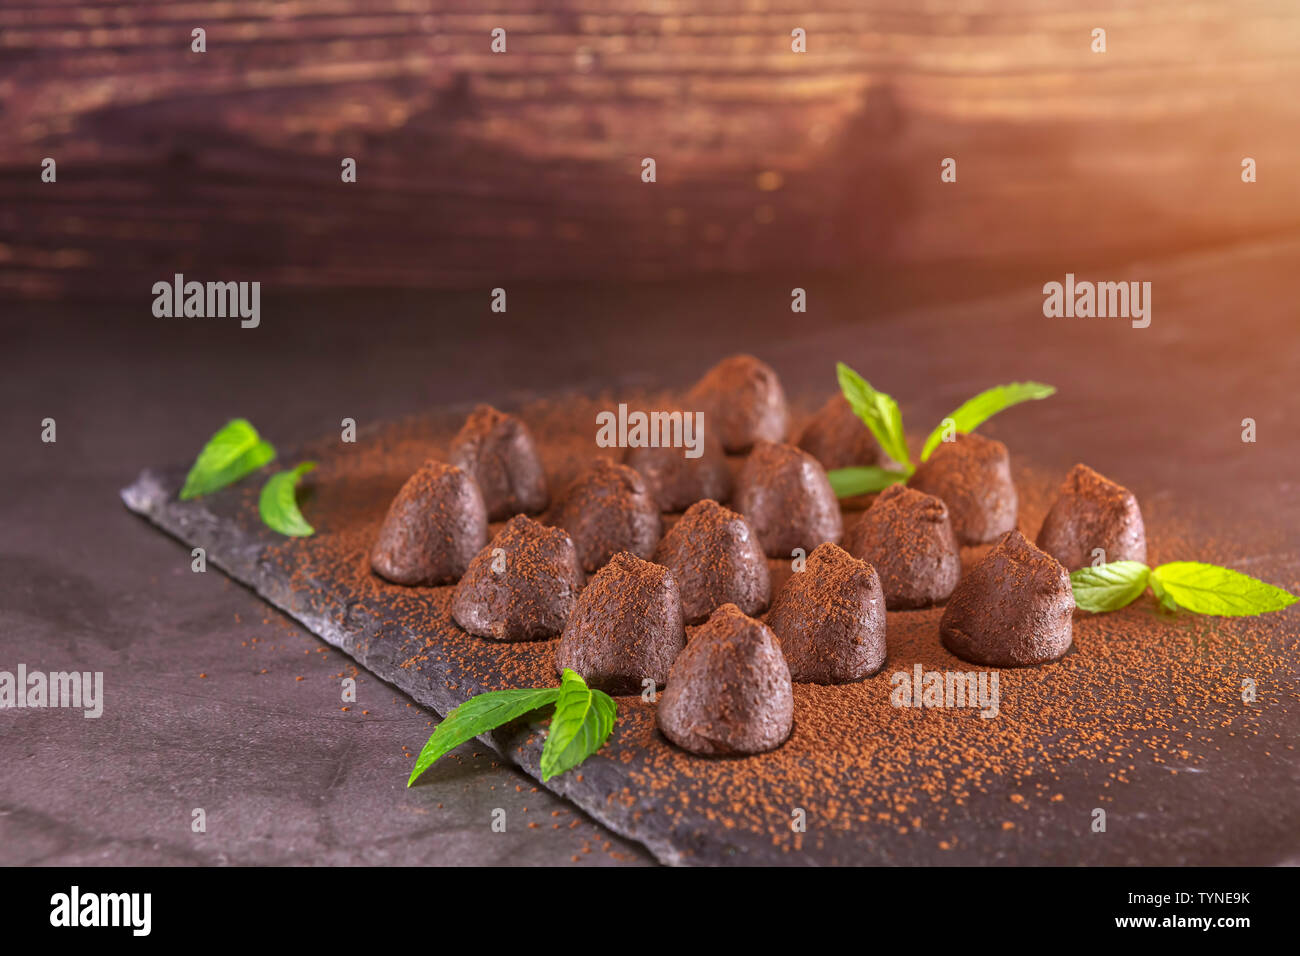 Homemade chocolate truffles with mint sprinkled with cocoa powder on slate. Focus on truffles Stock Photo